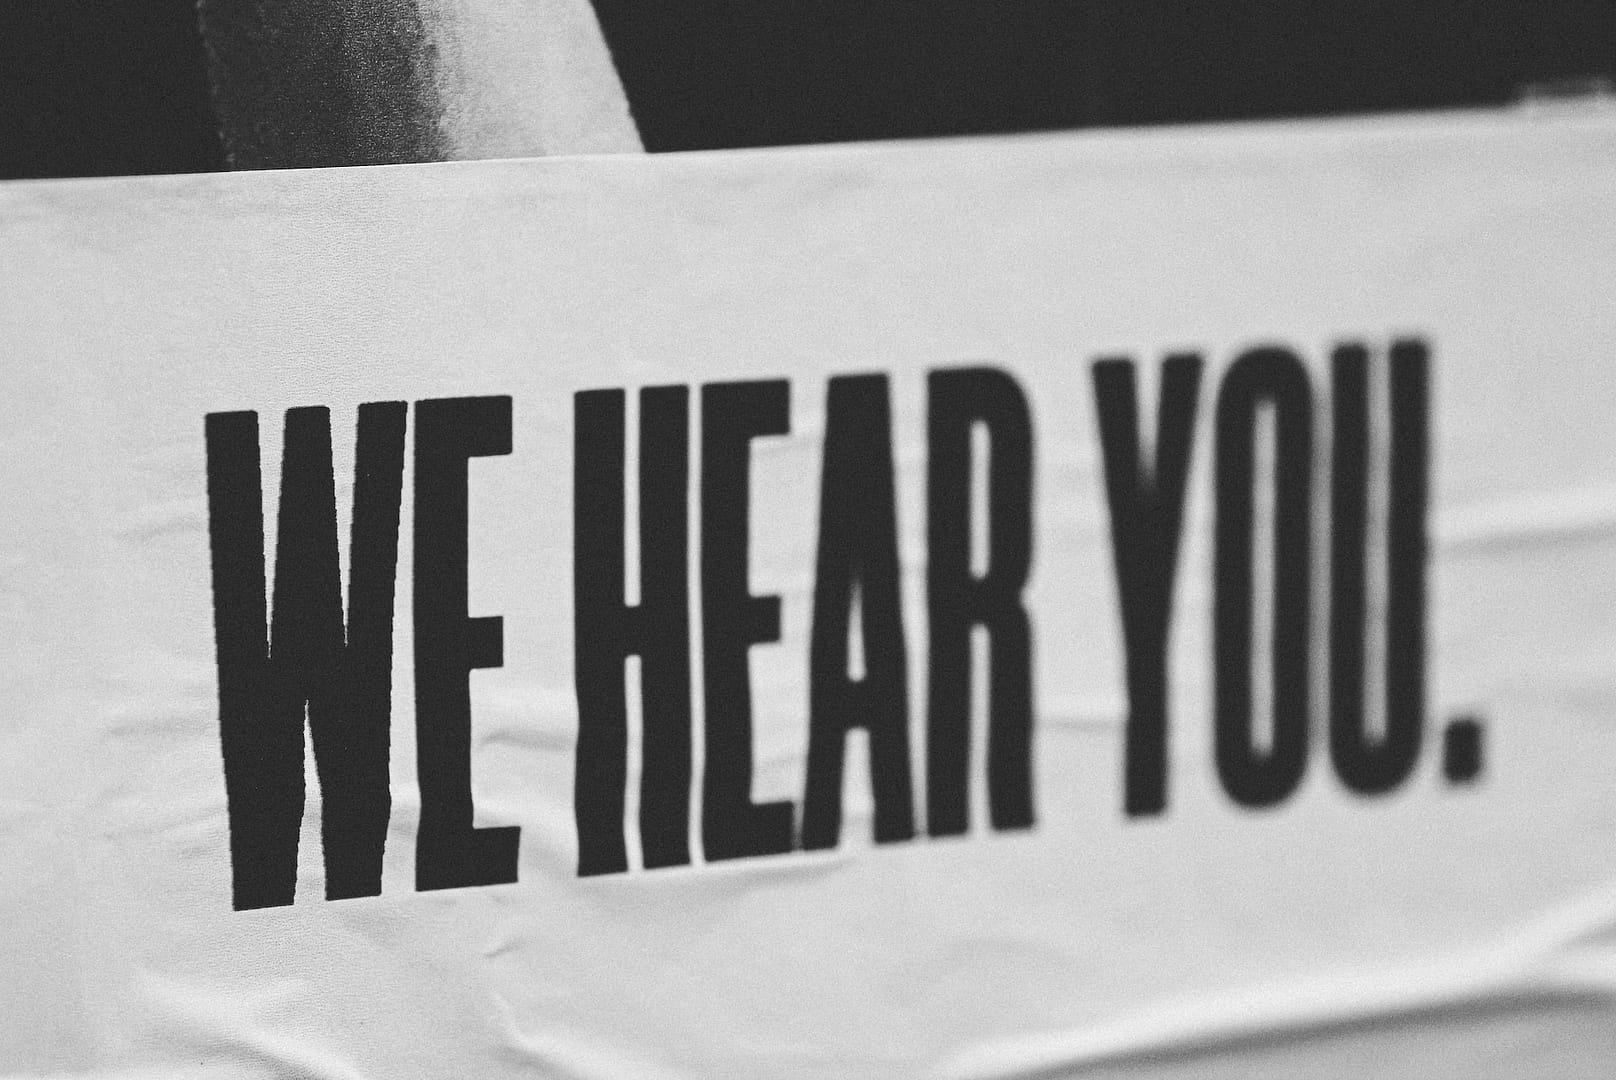 A 'we hear you.' sign